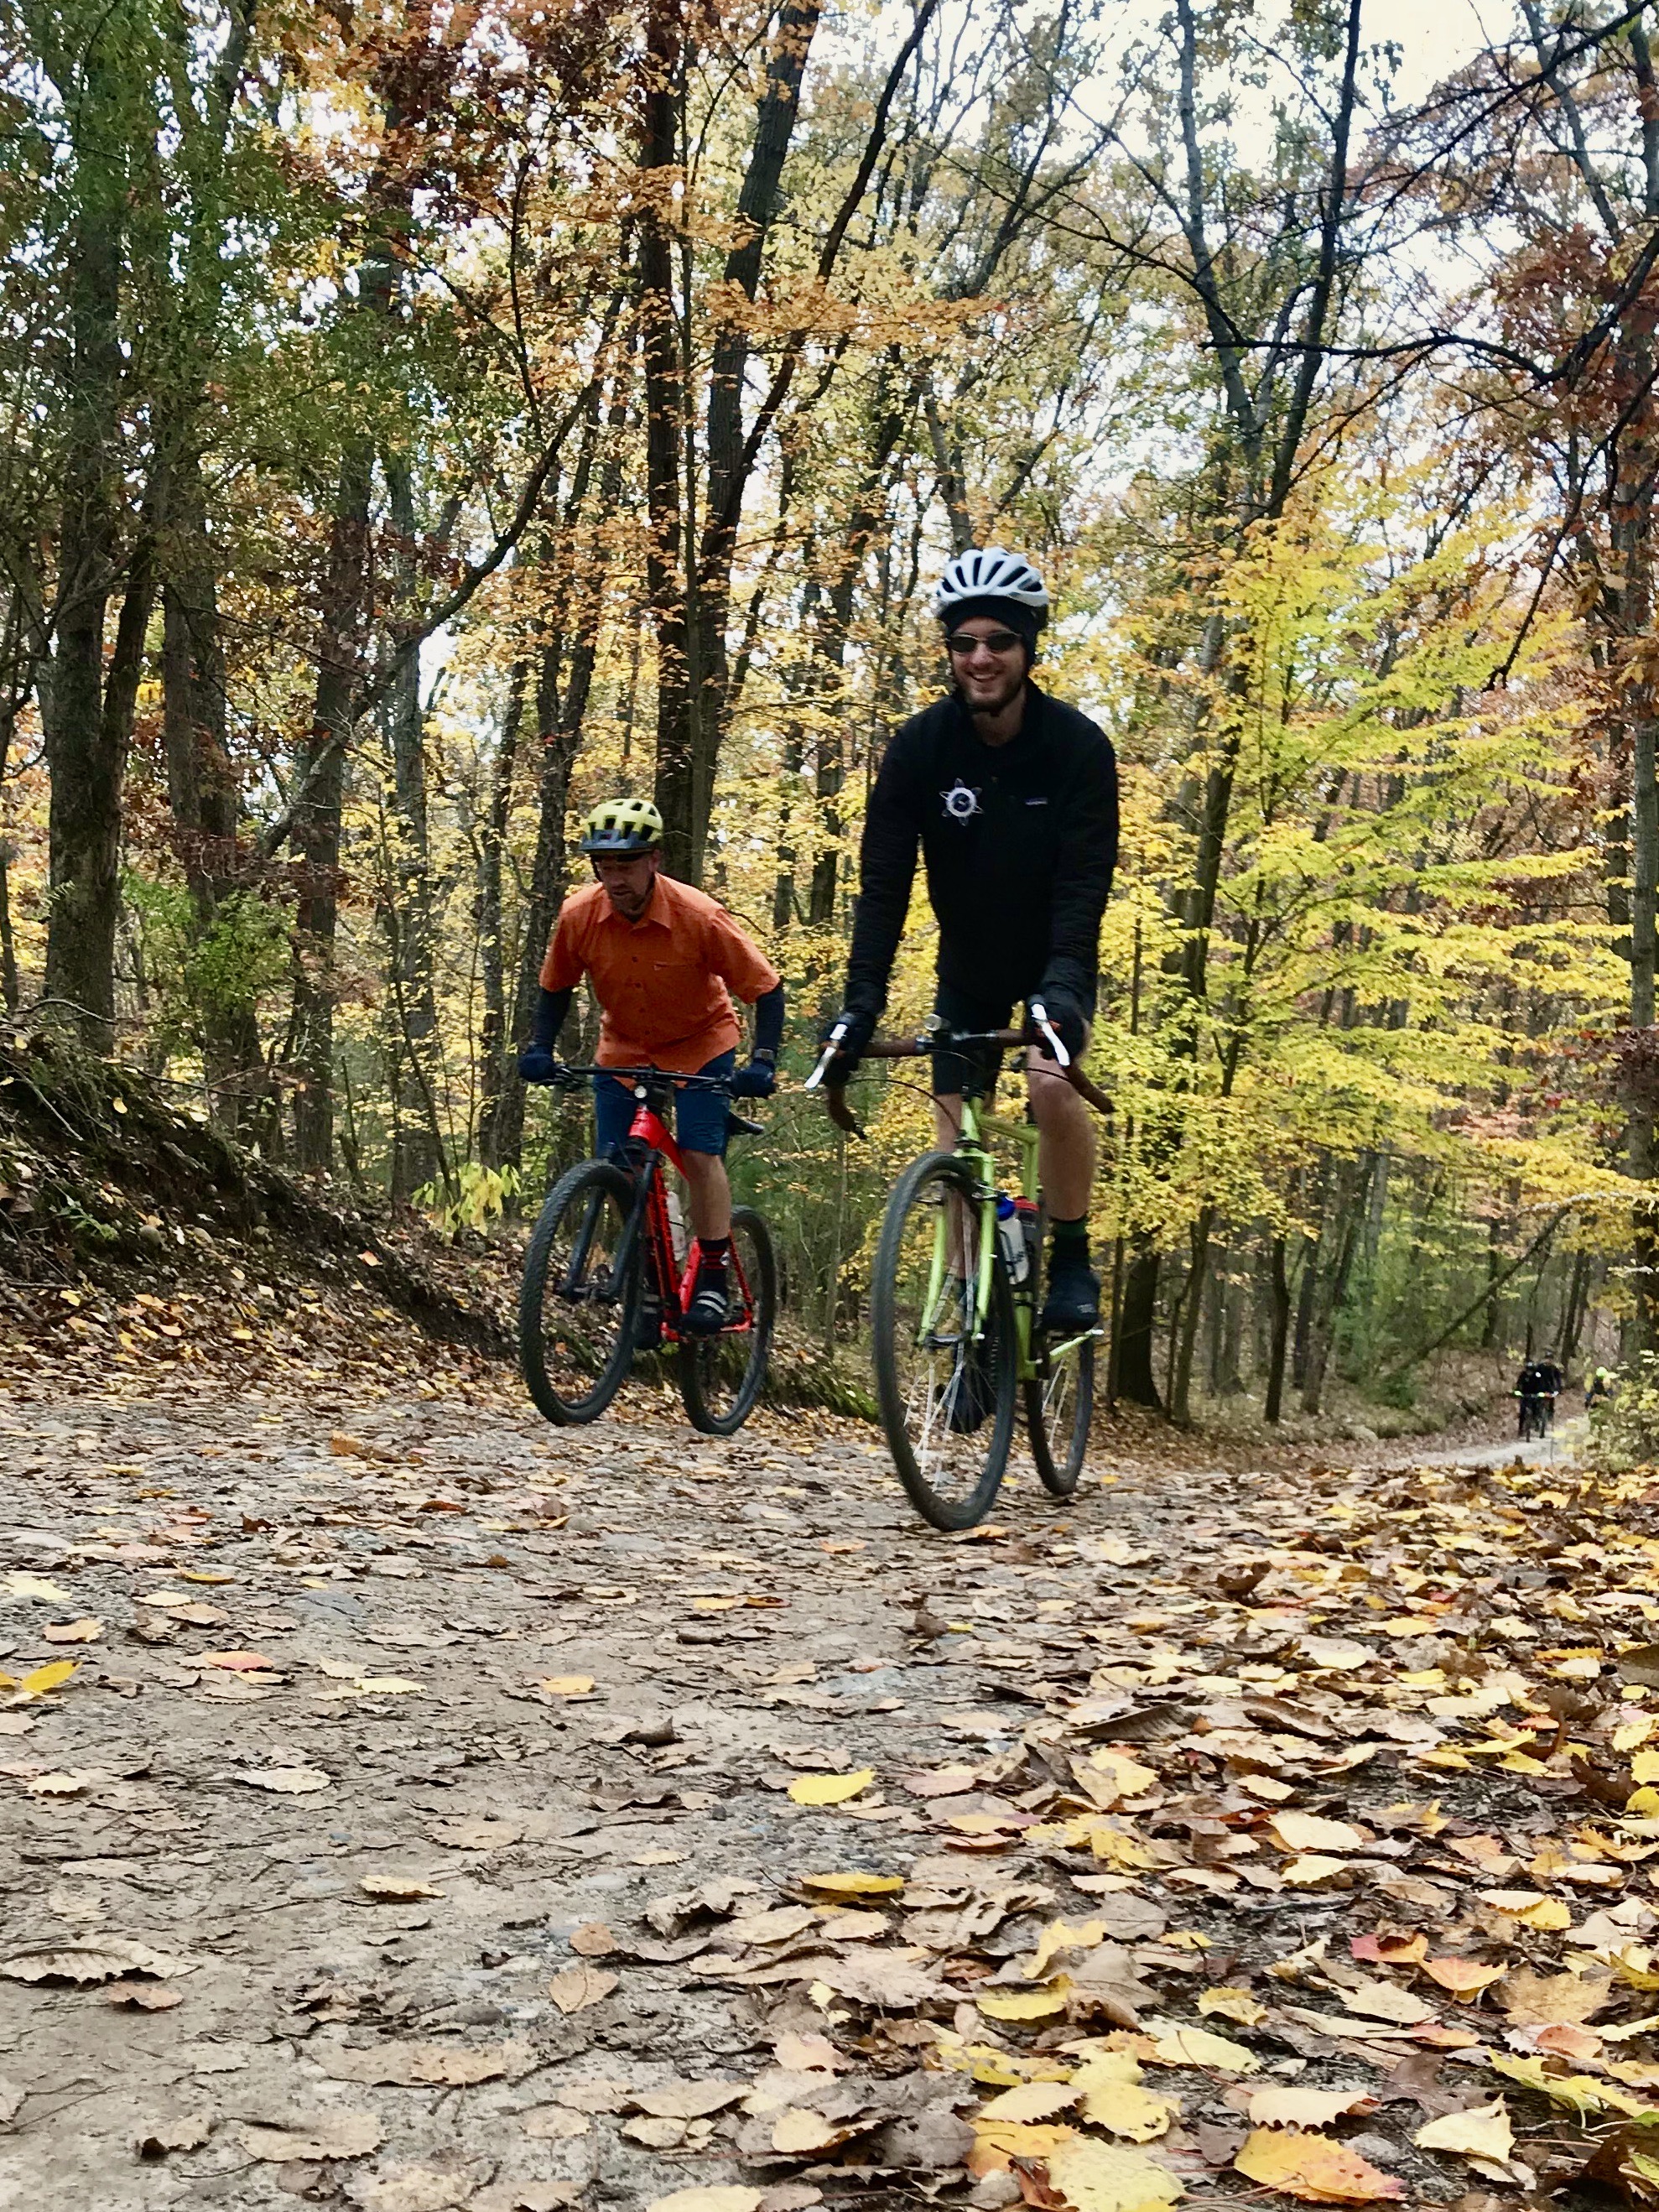 the author, riding a bicycle up a dirt road in autumn